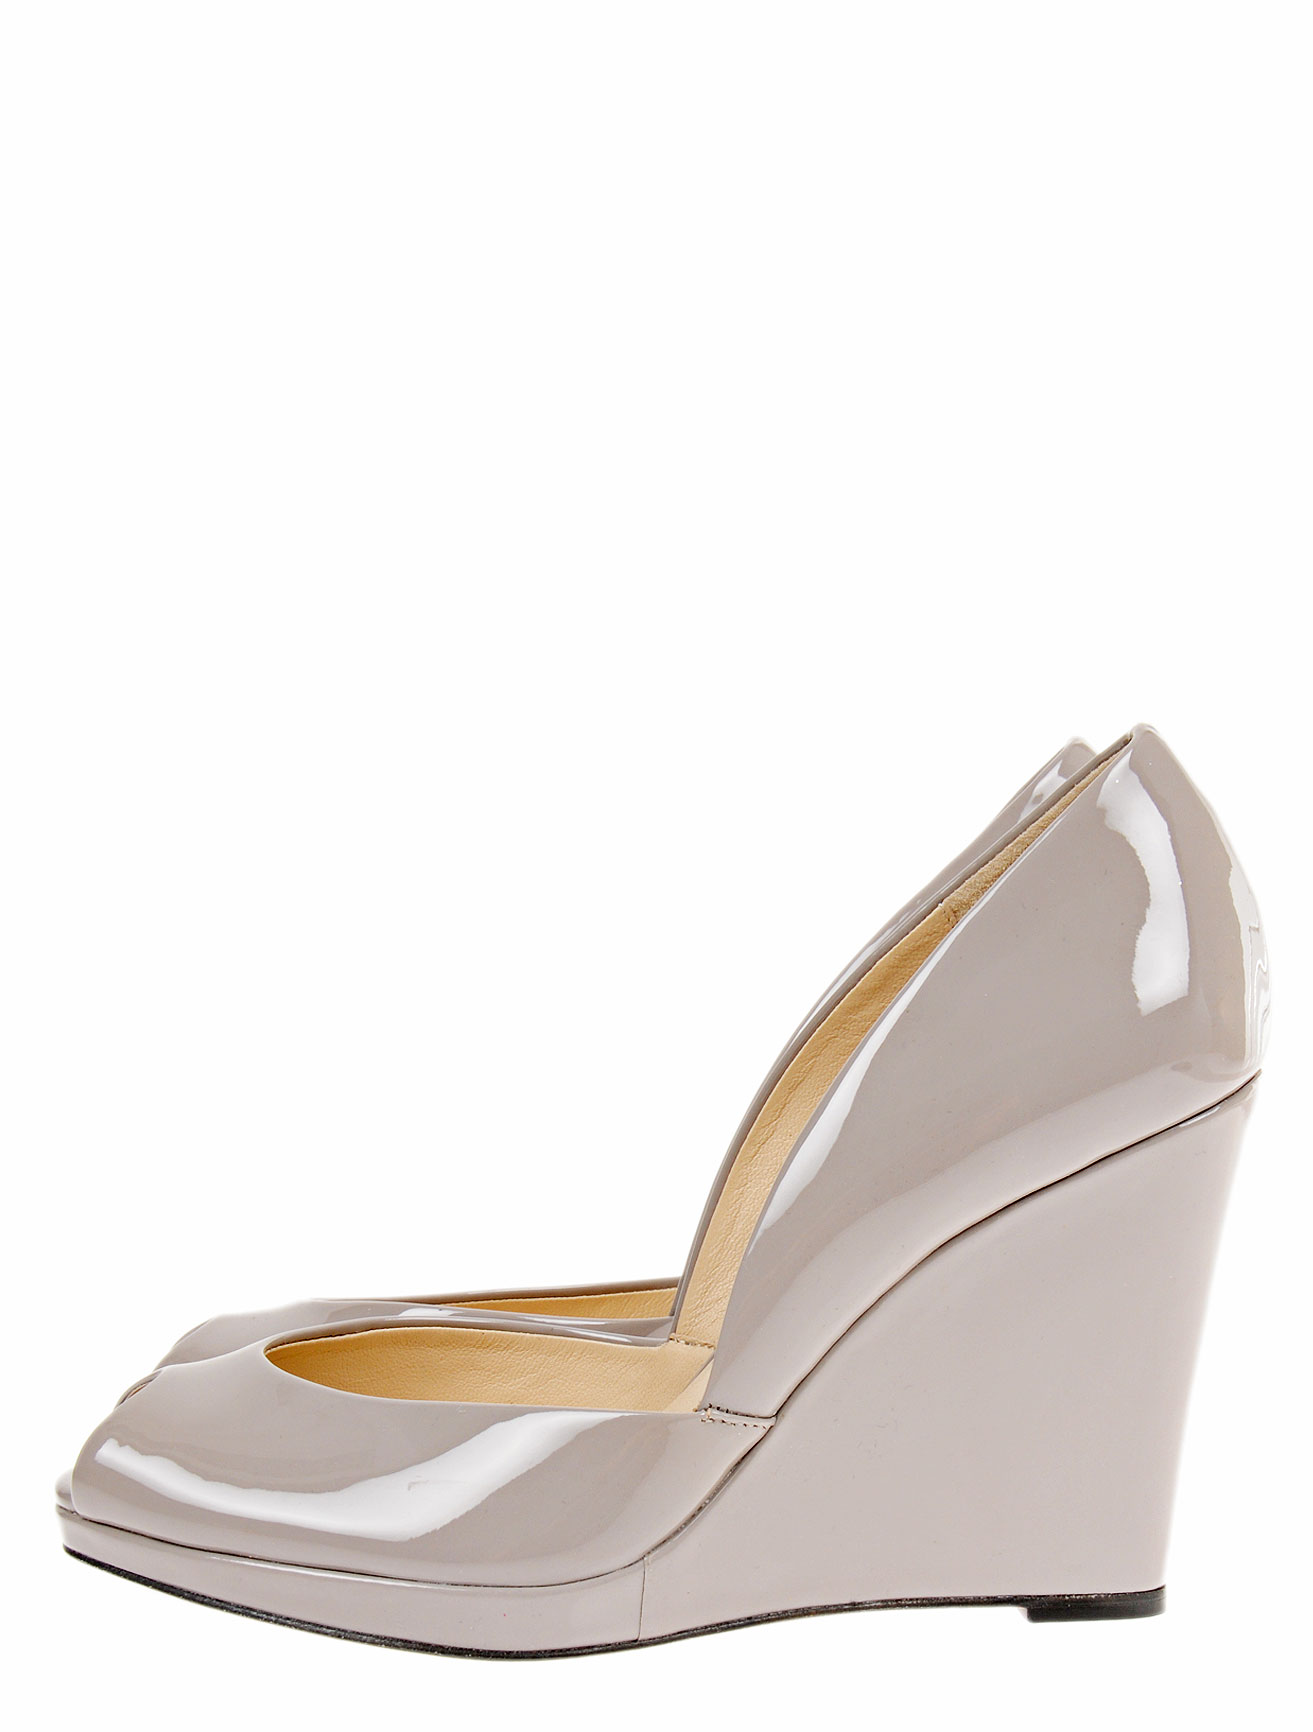 Kors By Michael Kors Vail Patent Leather Peep Toe Wedge in Gray (grey ...